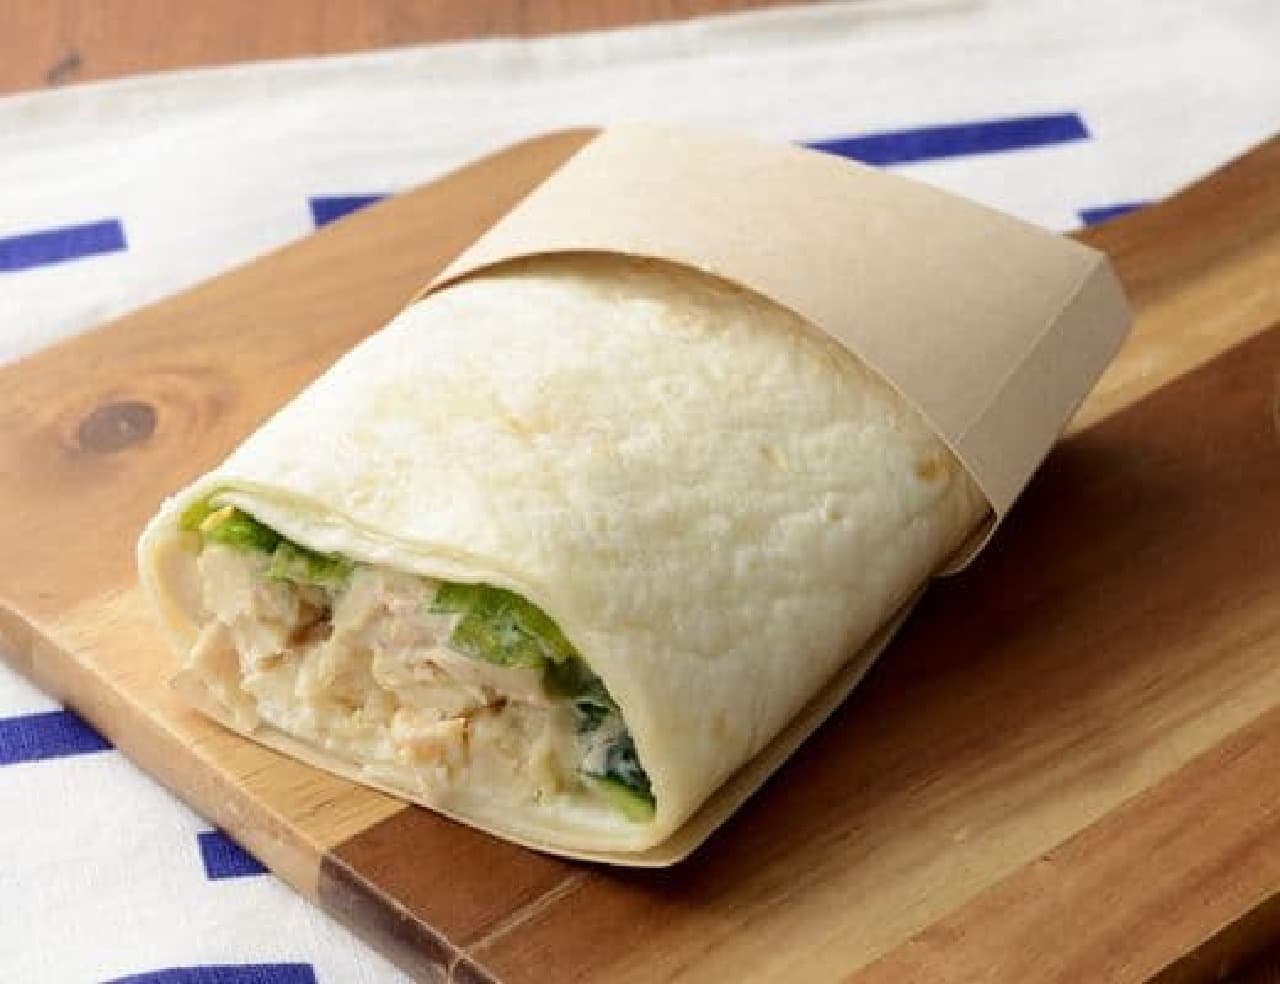 LAWSON "Salad Wrap Polypoly Vegetables and Chicken